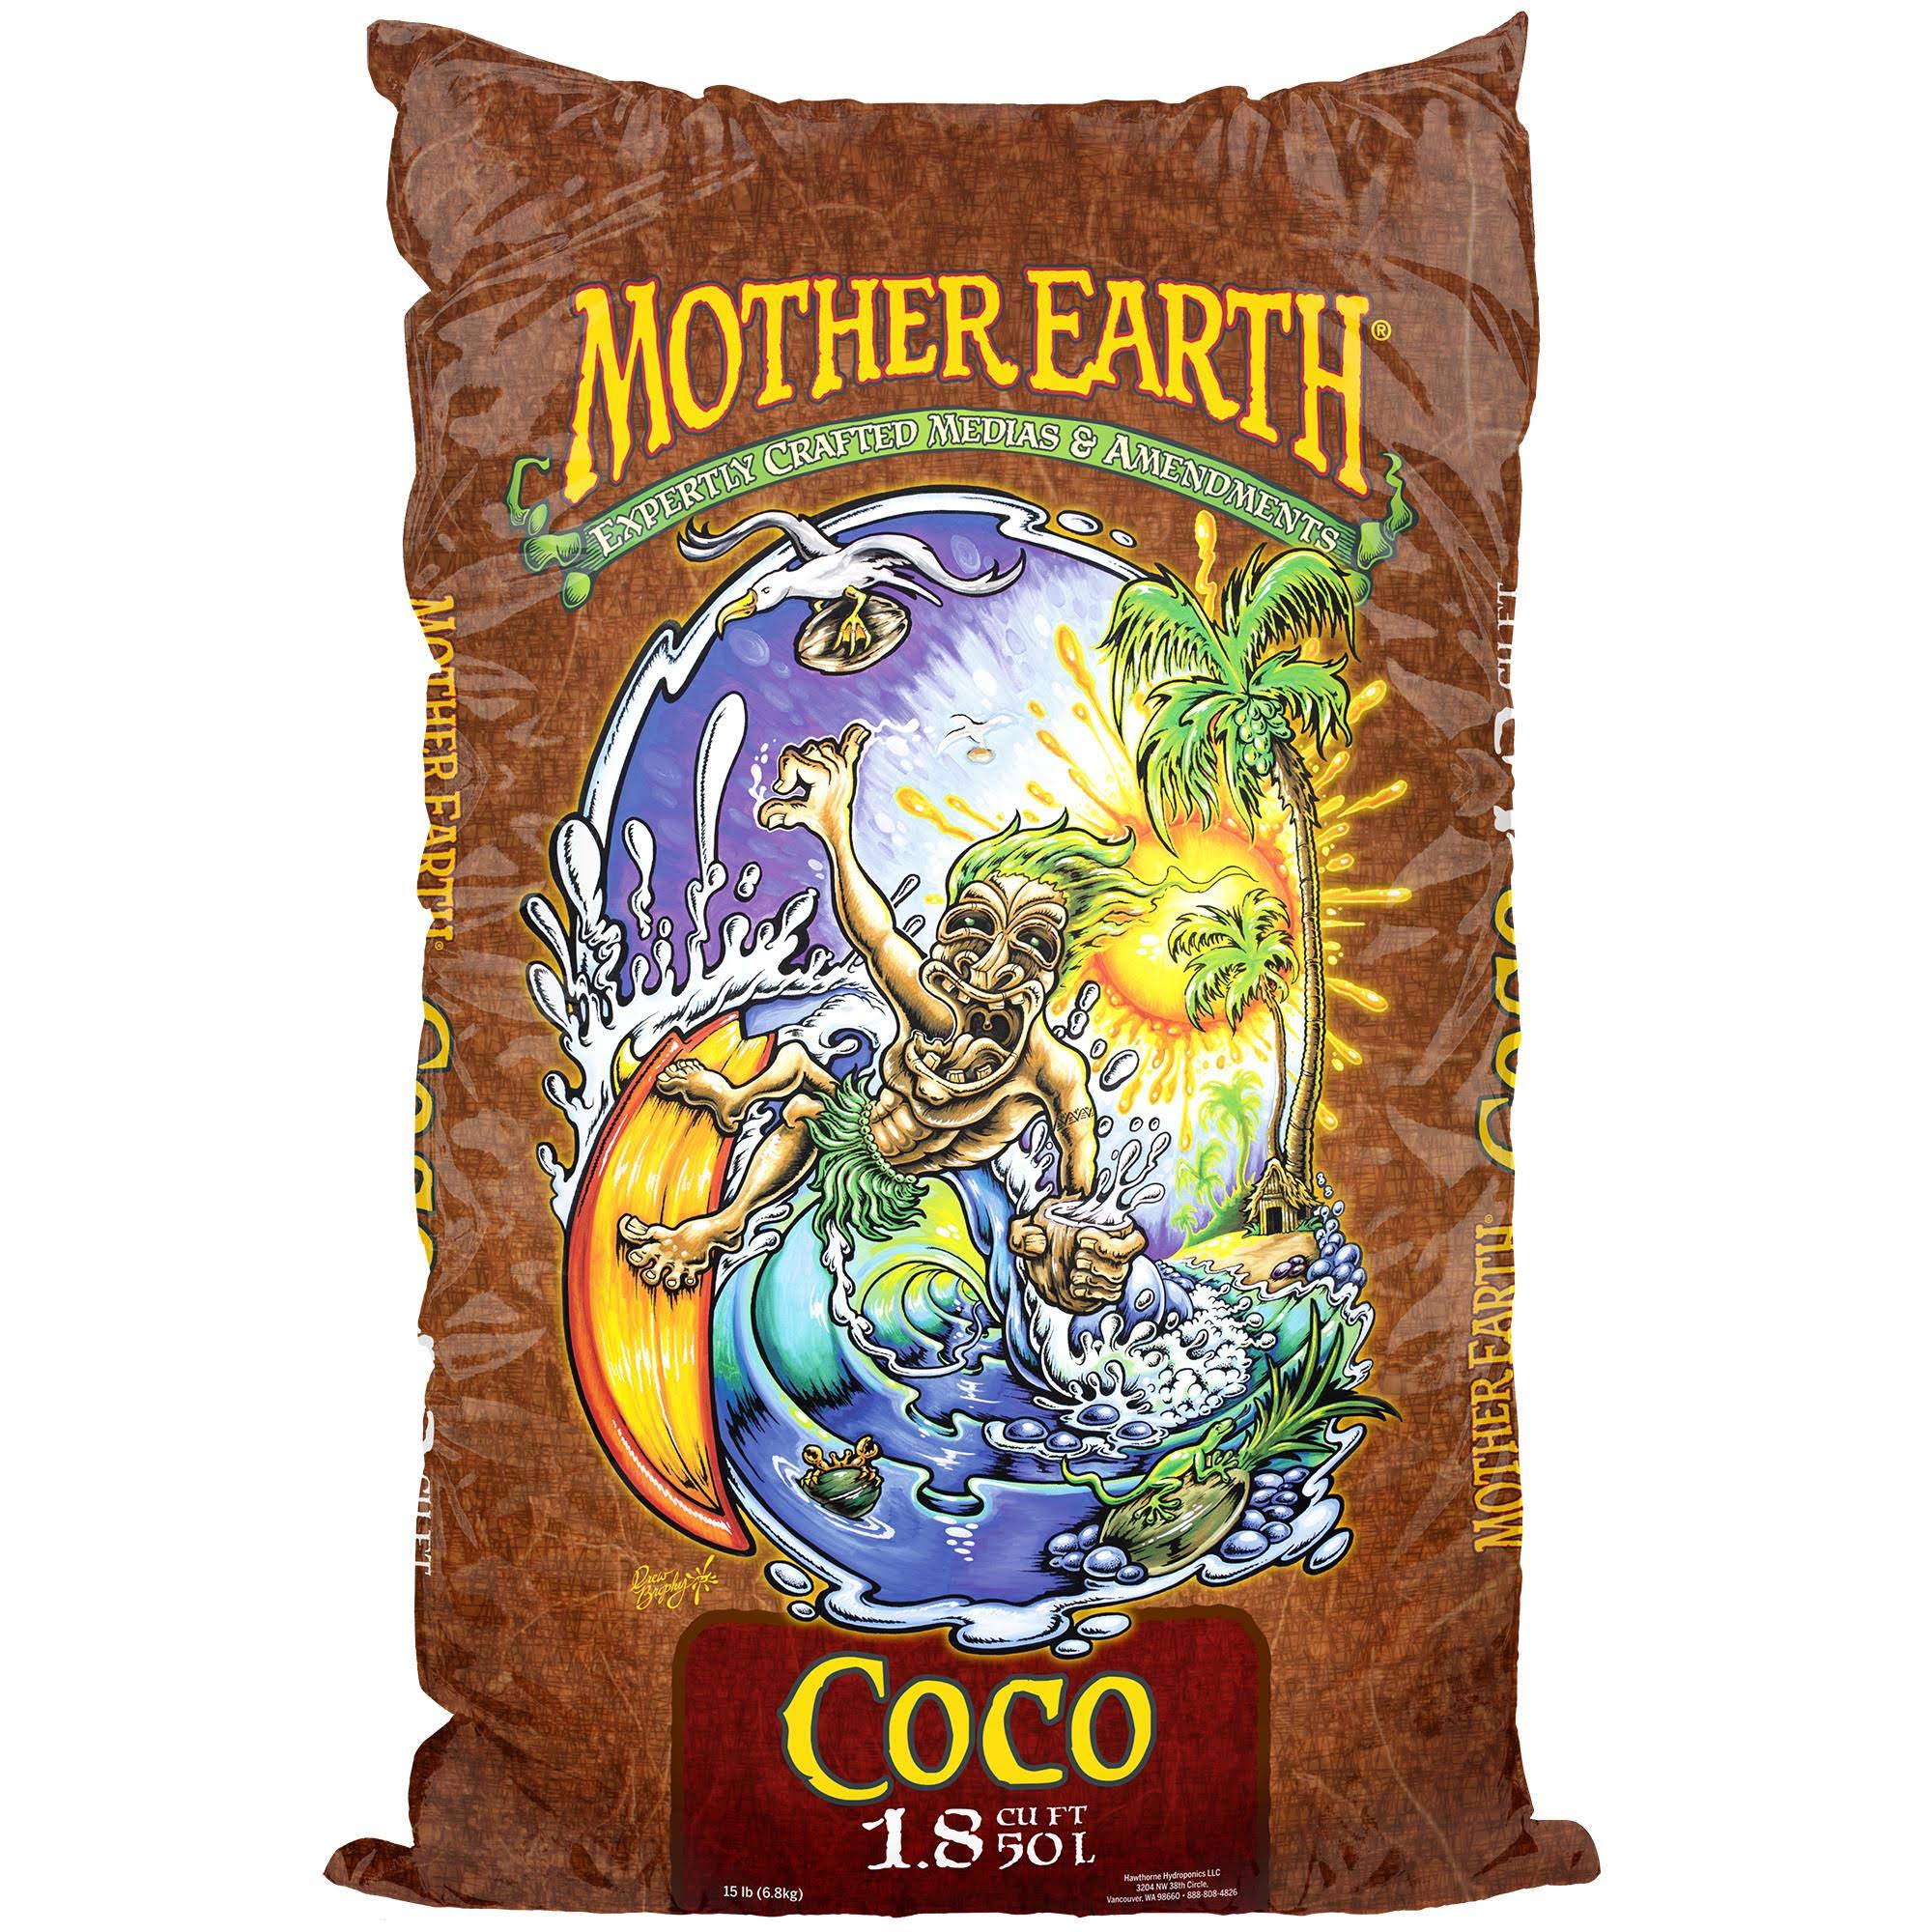 Mother Earth Coco 1.8CF